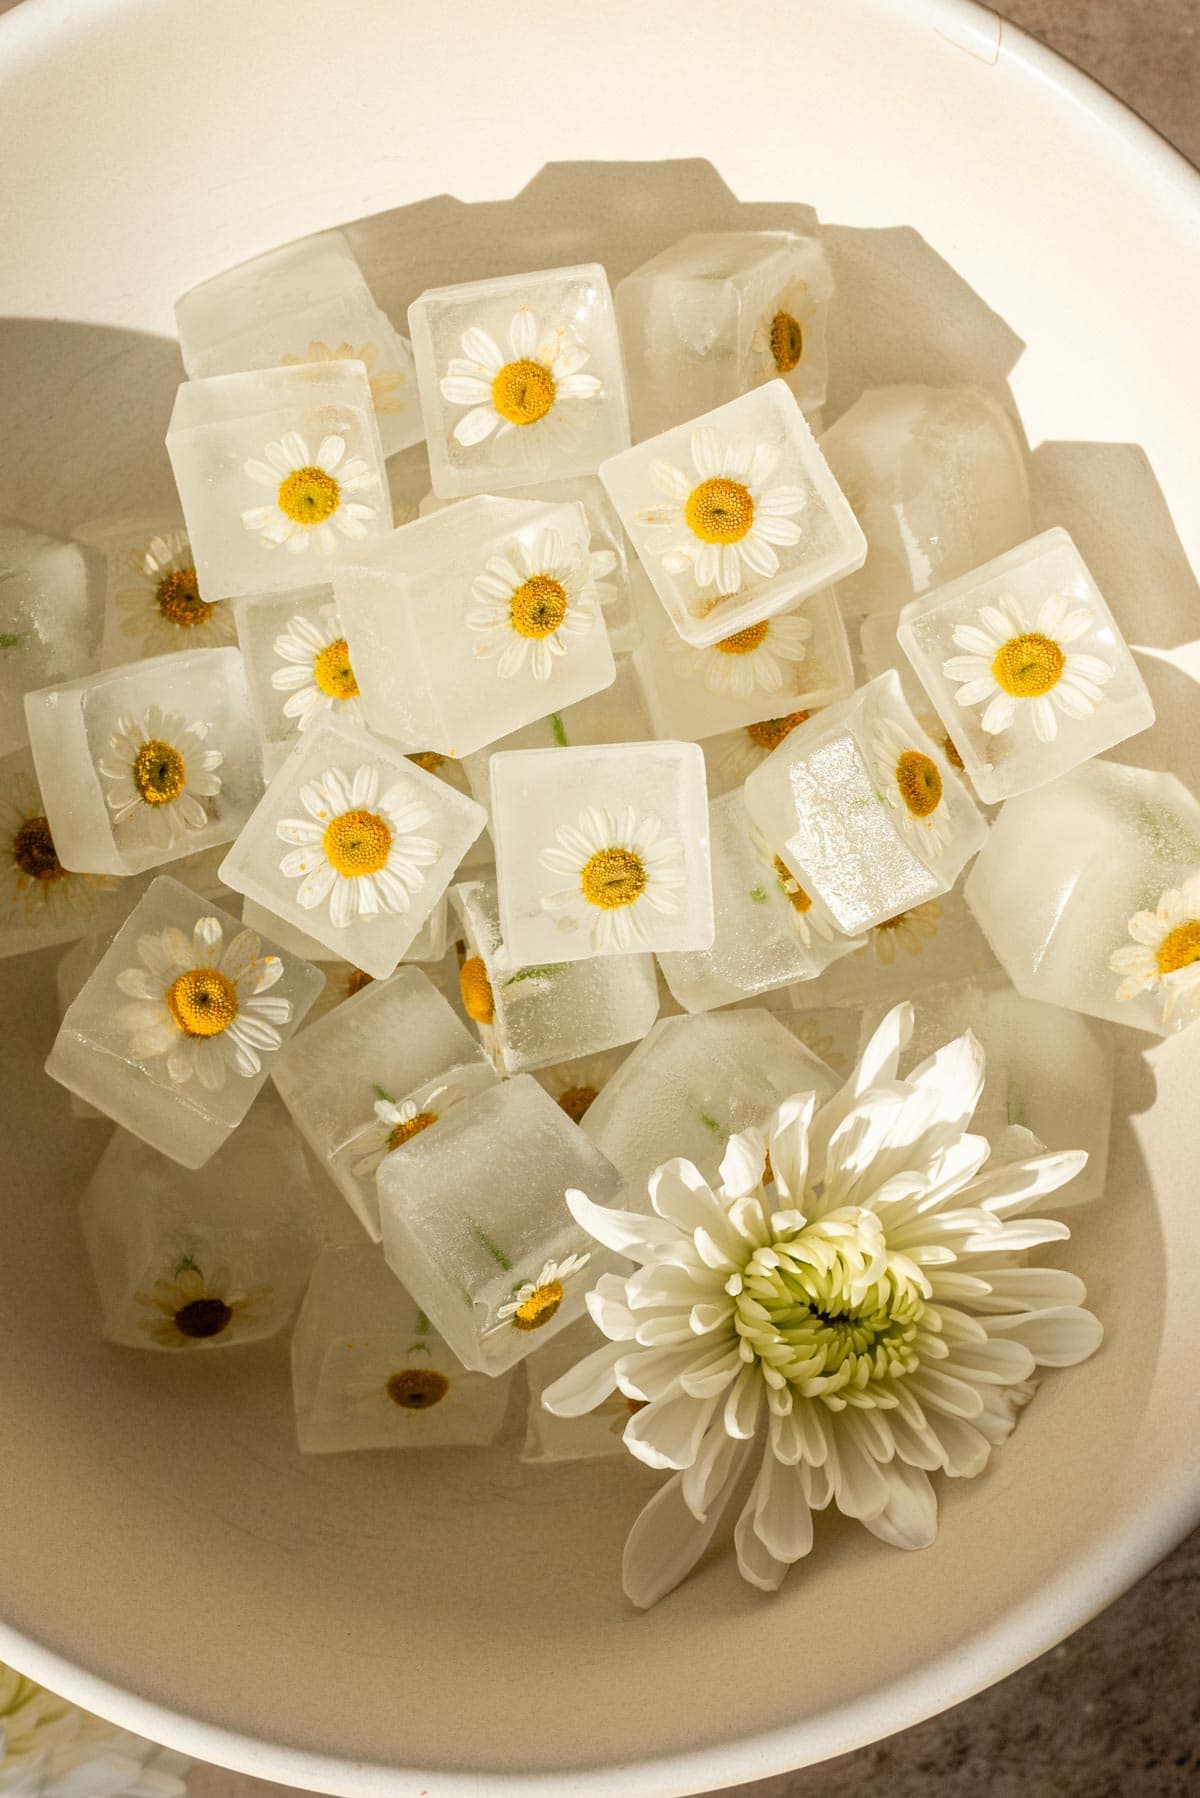 Ice with little flowers frozen in the cubes.